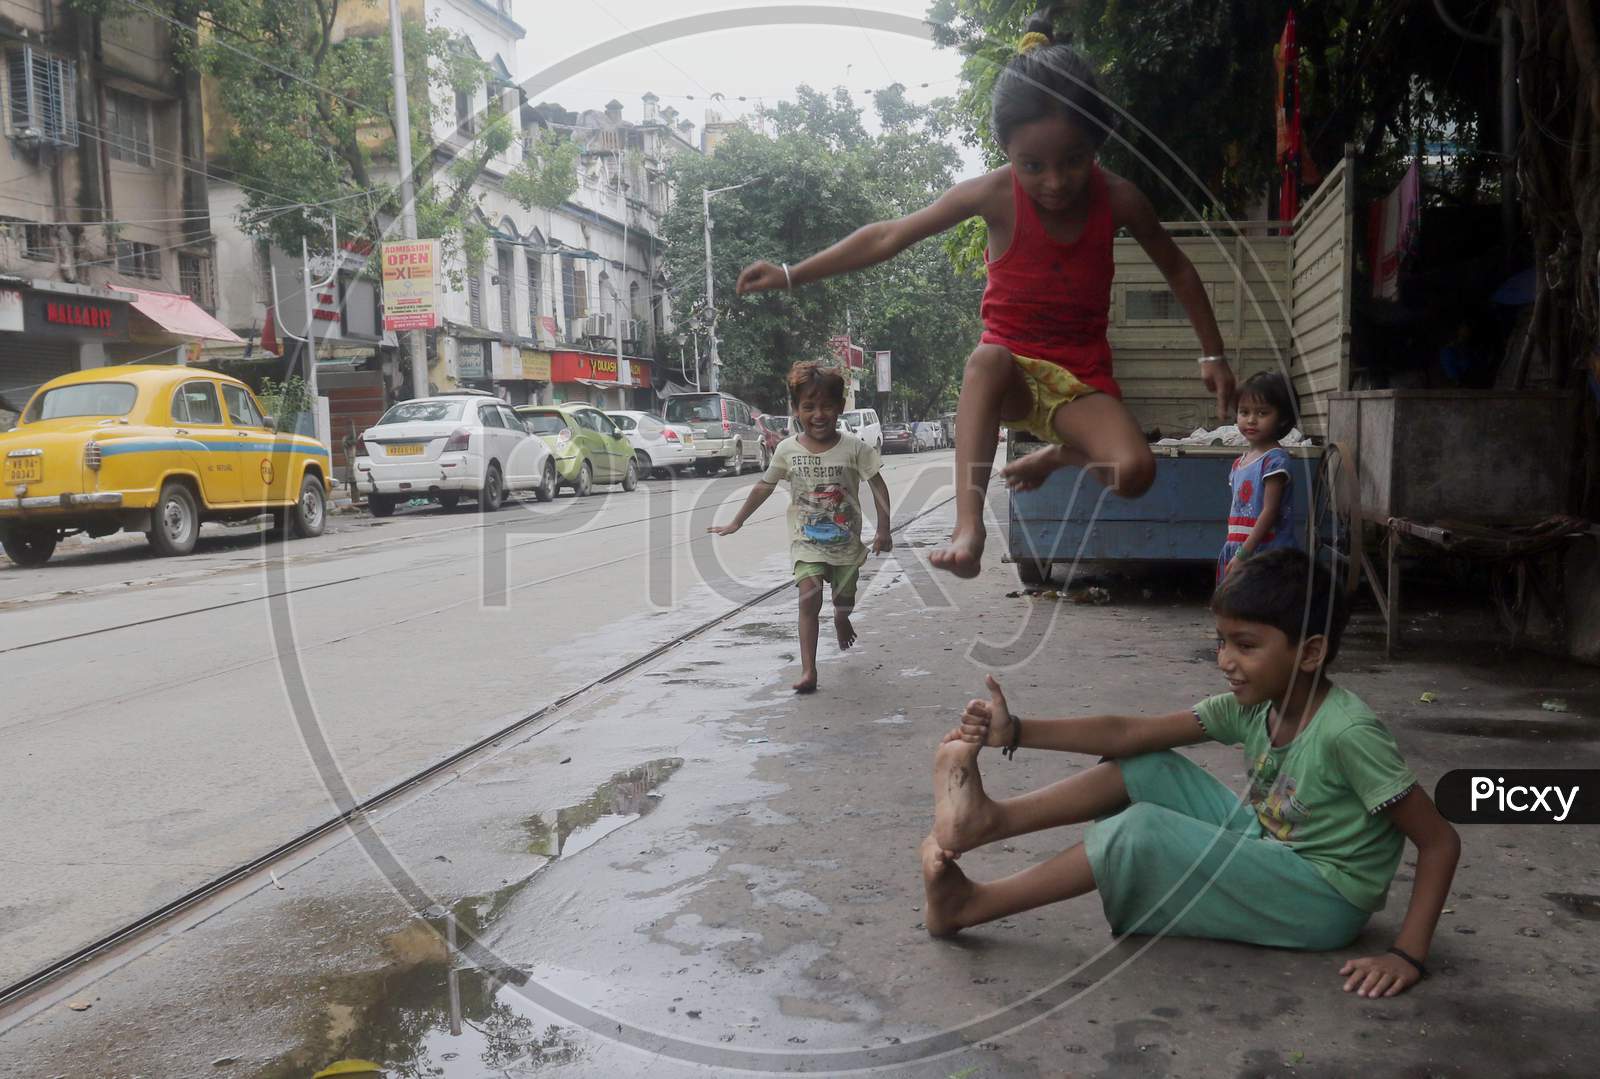 Kids play on an empty road During The Complete Biweekly Lockdown To Curb Covid 19 Spread In Kolkata On August 27 2020